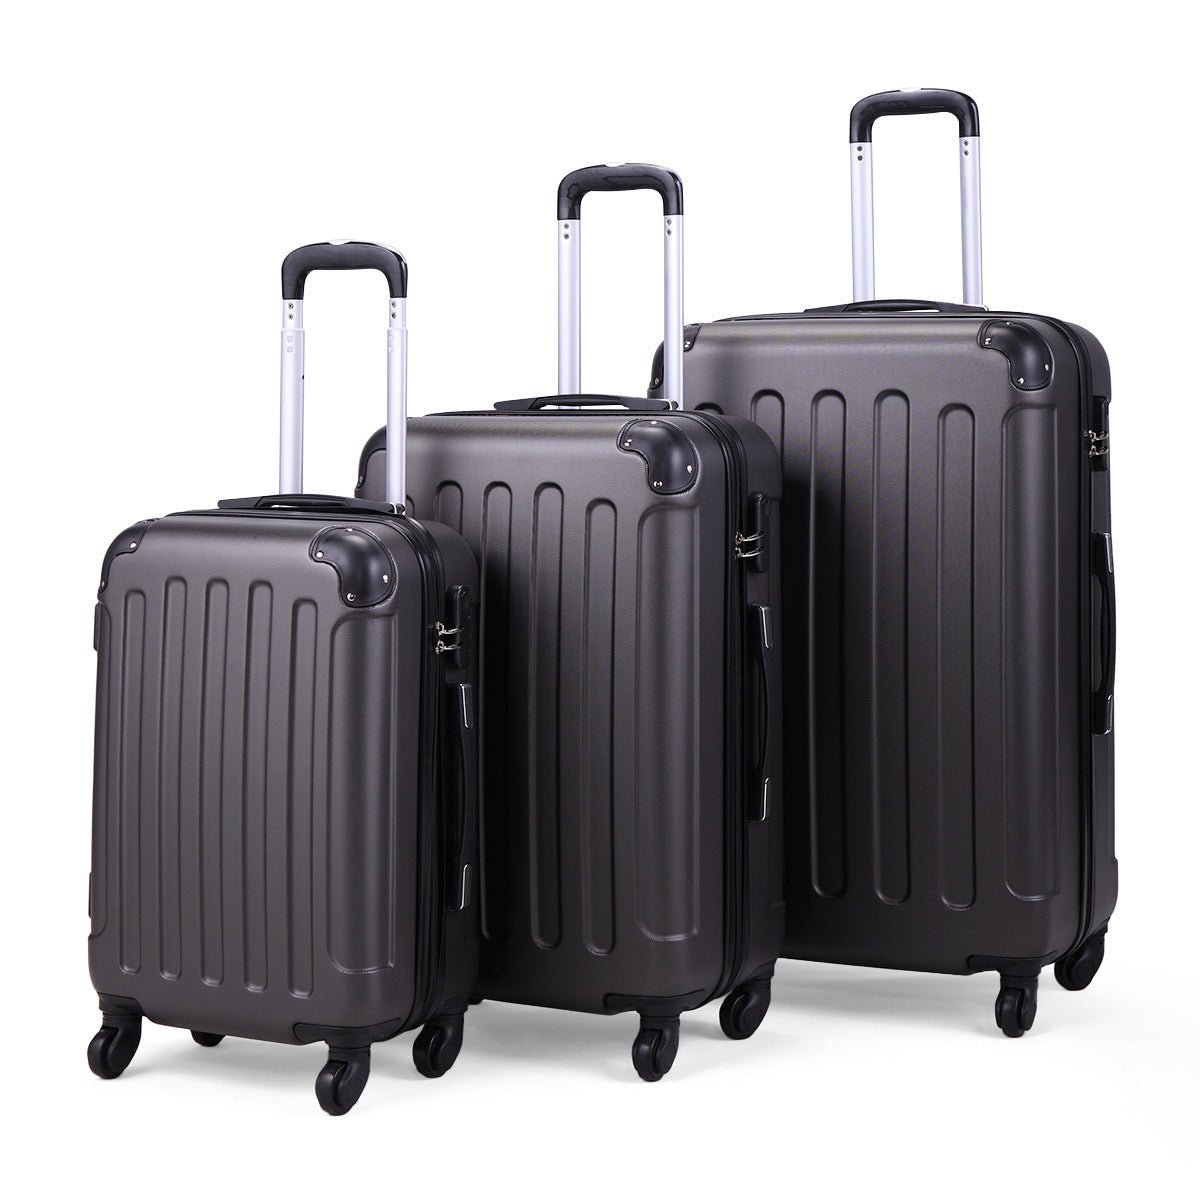 3-Piece Luggage Expandable Lightweight Travel Suitcase Set with Code Lock, Spinner Wheels, 20/24/28 Inches Moorescarts